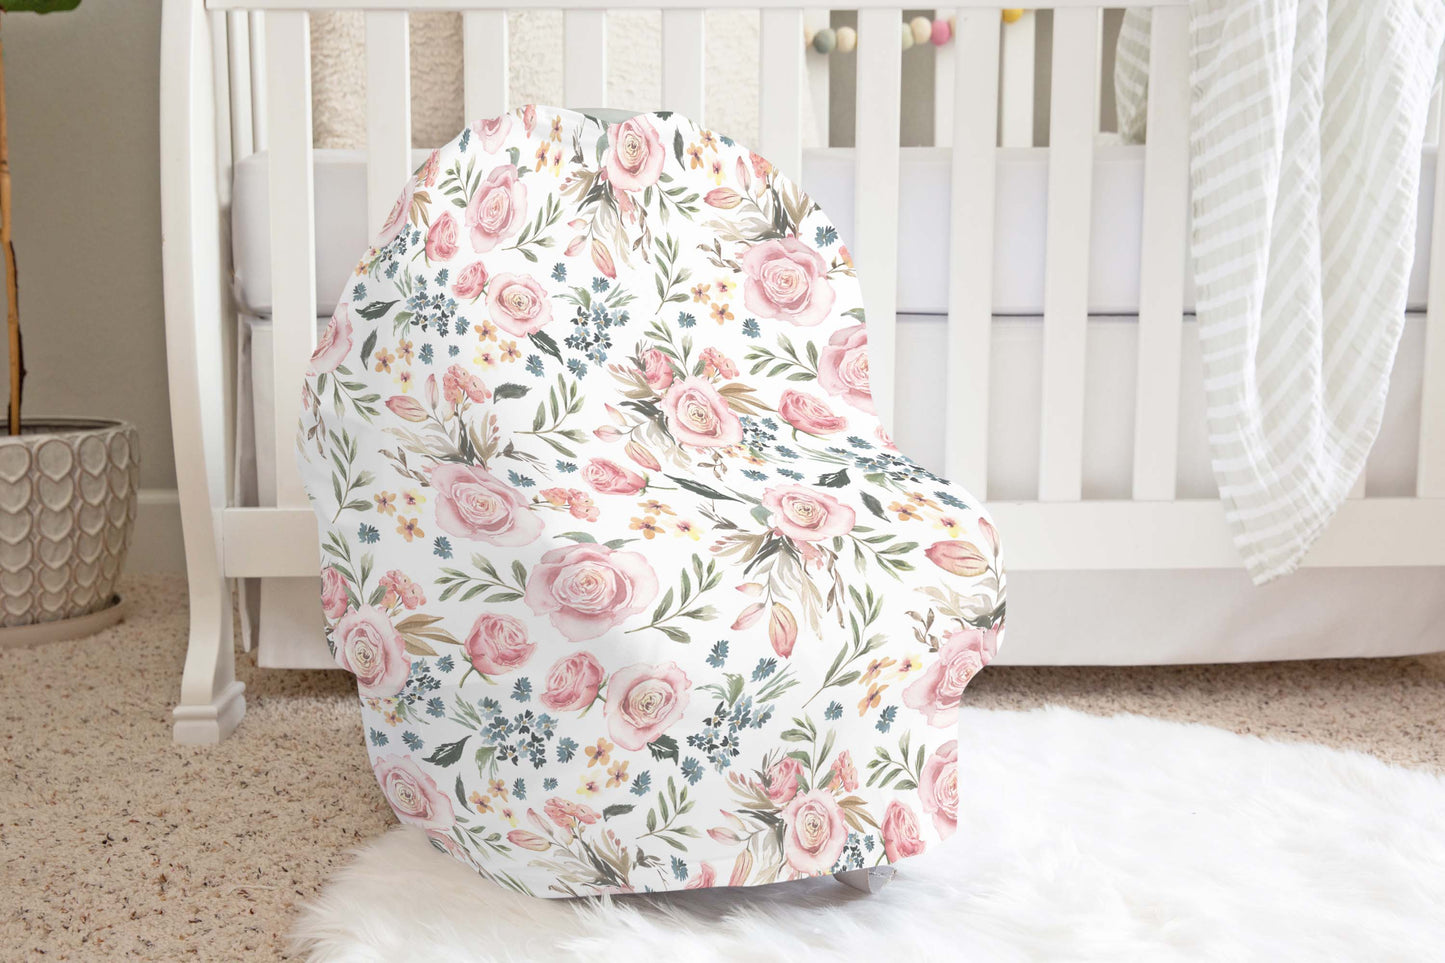 Roses Car Seat Cover, Pink Floral Nursing Cover - Candy Rose